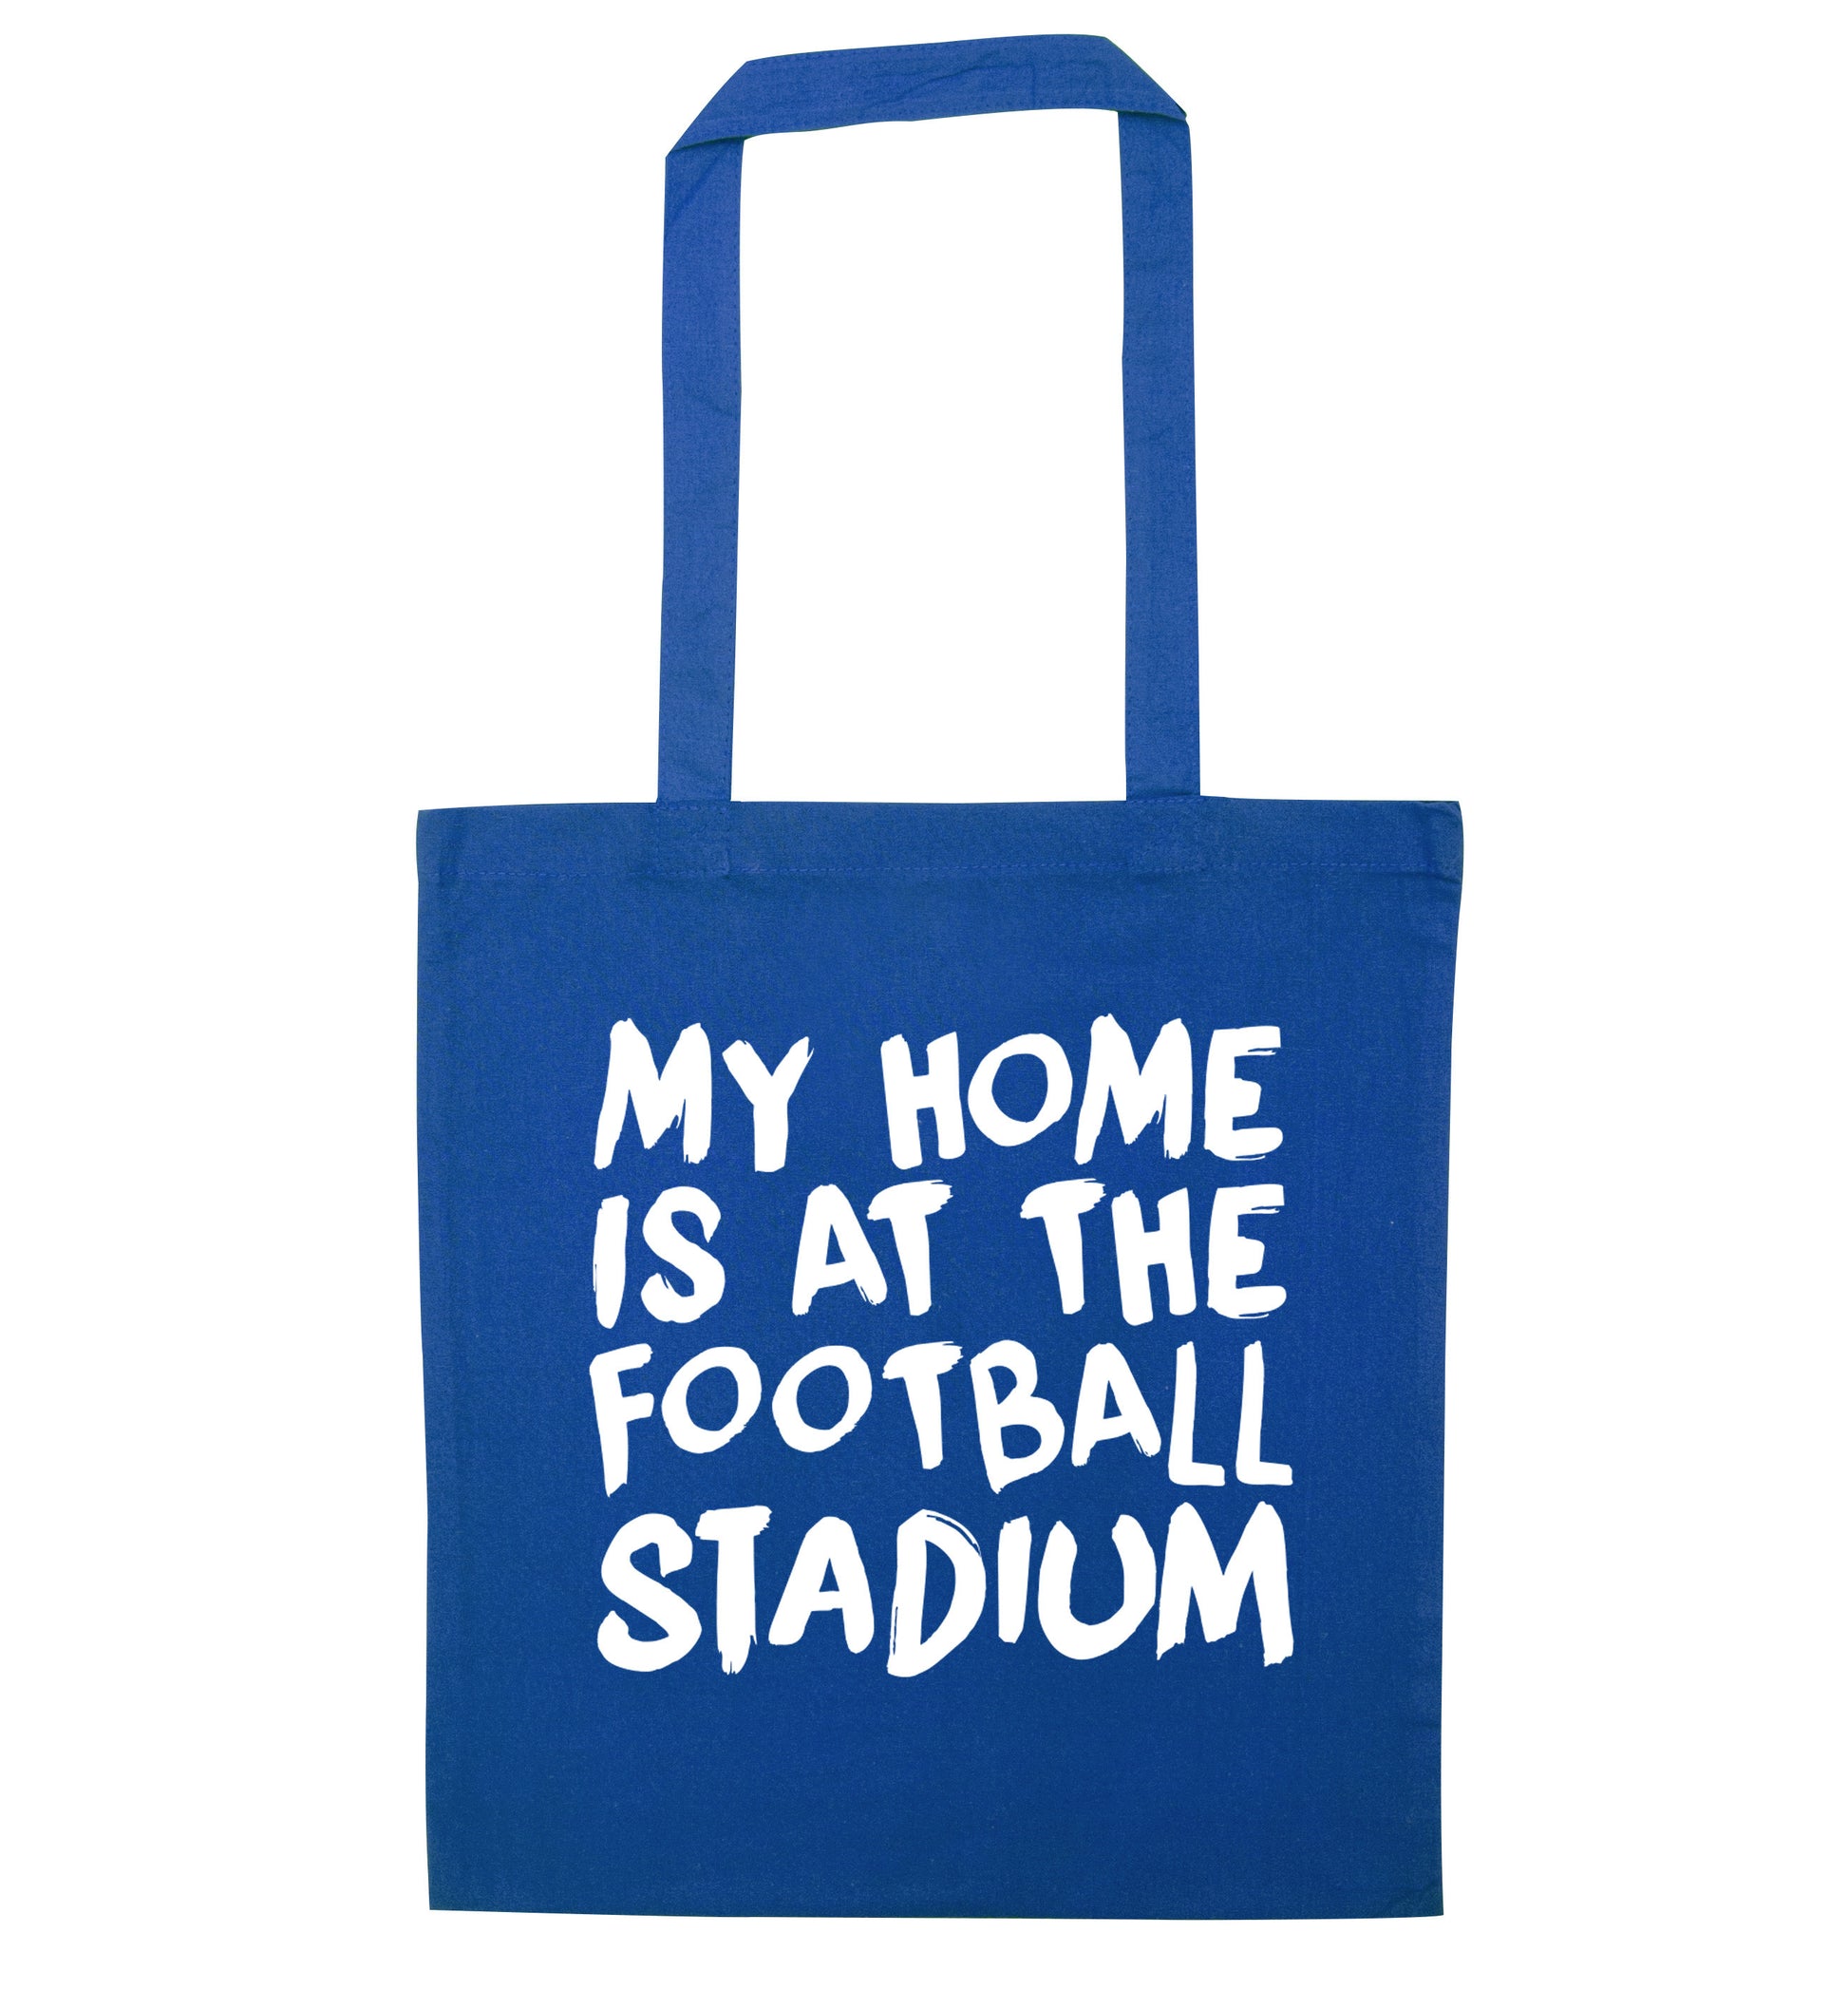 My home is at the football stadium blue tote bag